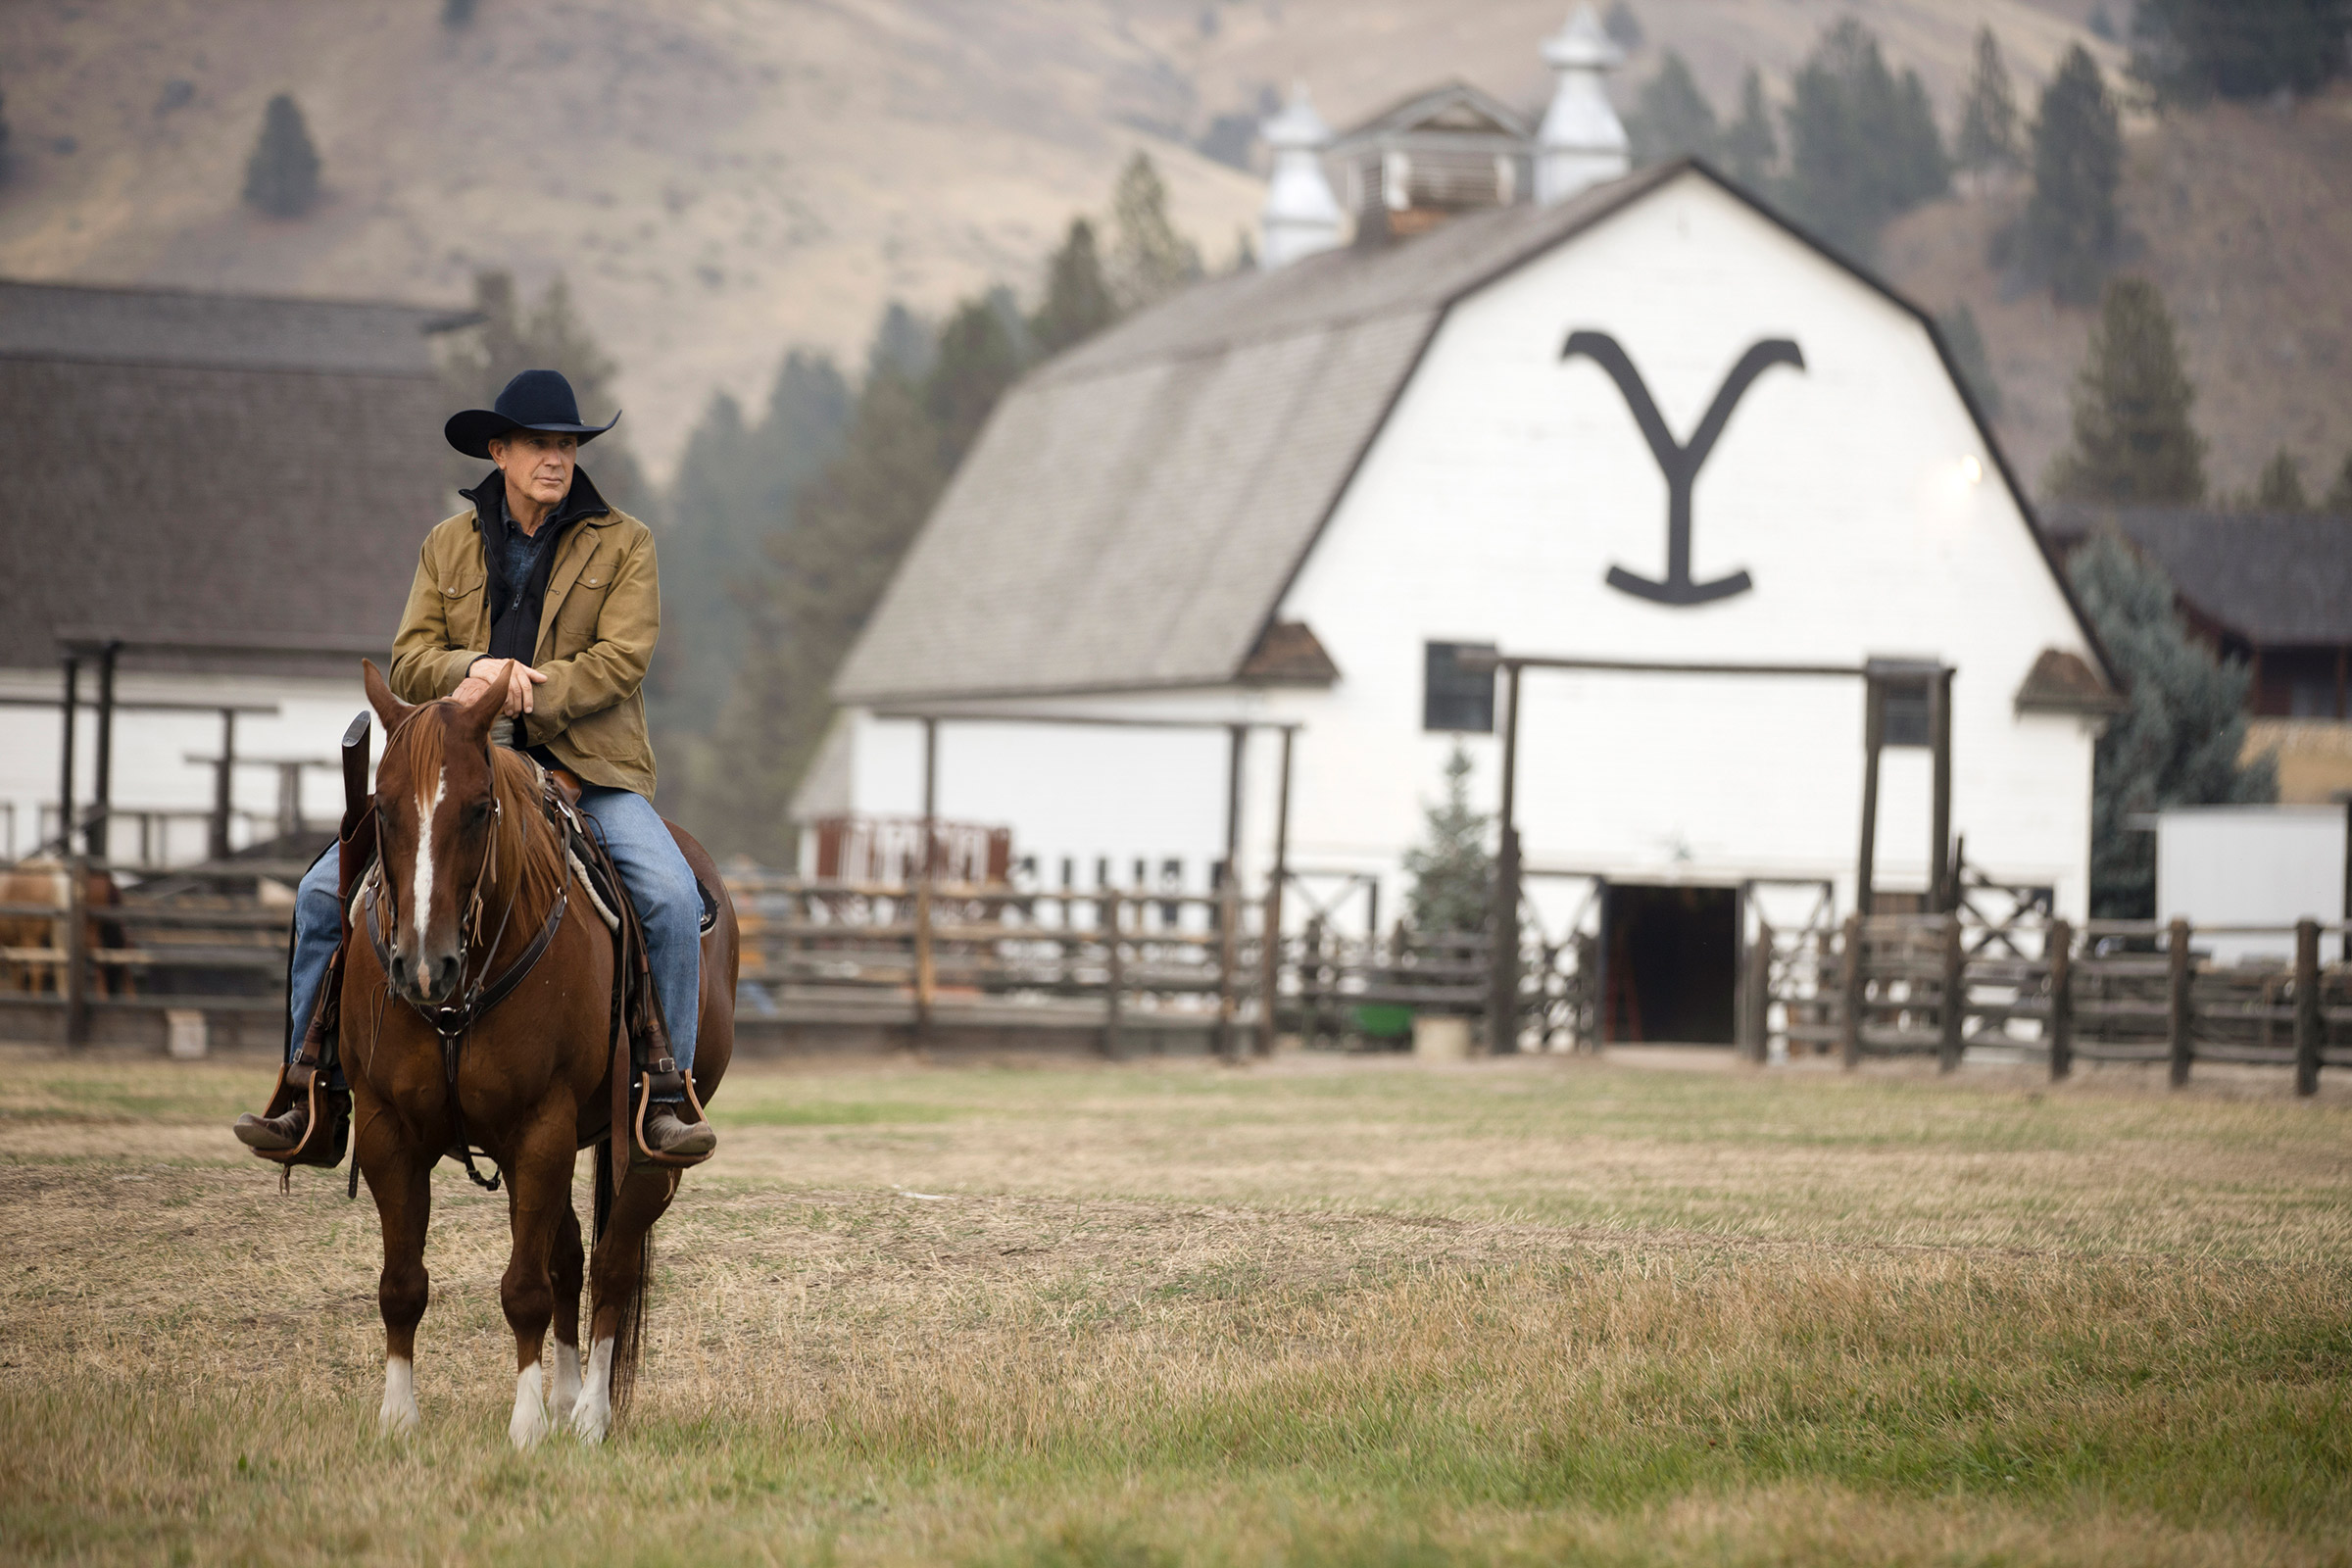 Kevin Costner as John Dutton in <i>Yellowstone</i>. (Courtesy Paramount Network)